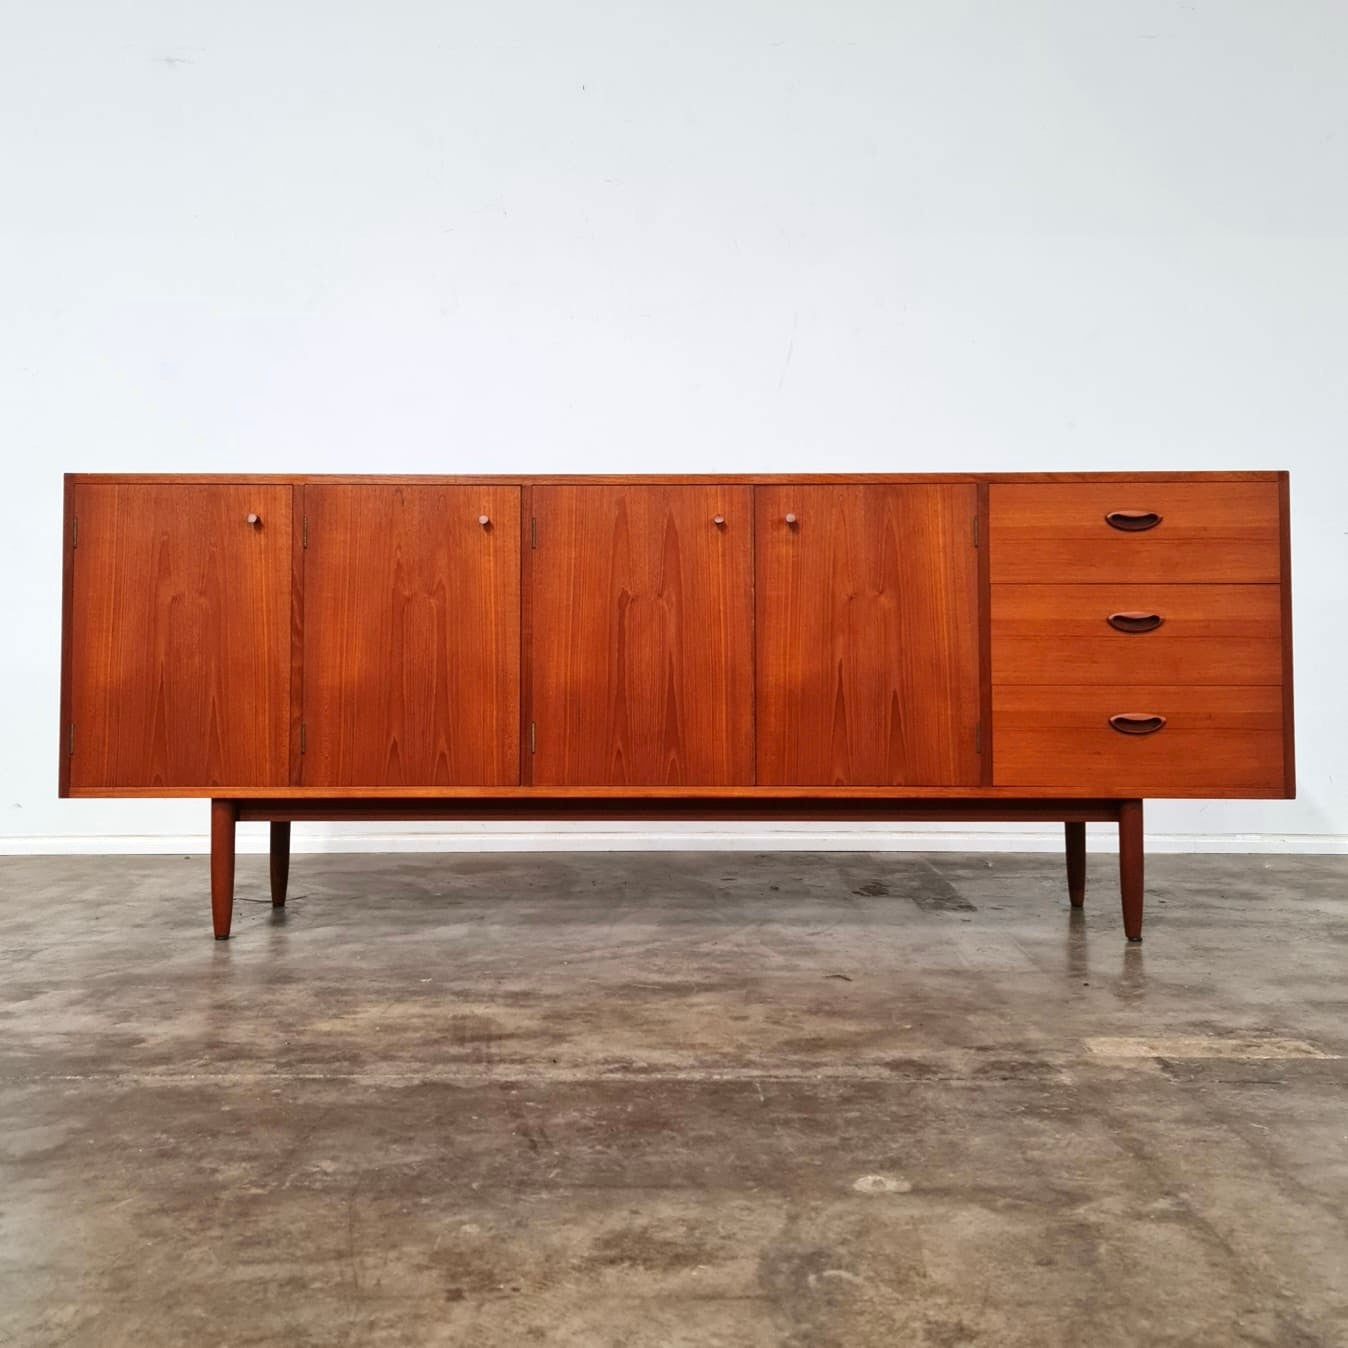 Large teak Chiswell sideboard produced in NSW Australia in May 1965. This sideboard features four doors, three drawers, bottle storage, glass storage and a cutlery drawer. Made from teak venner and solid teak legs. The top surface has been sanded